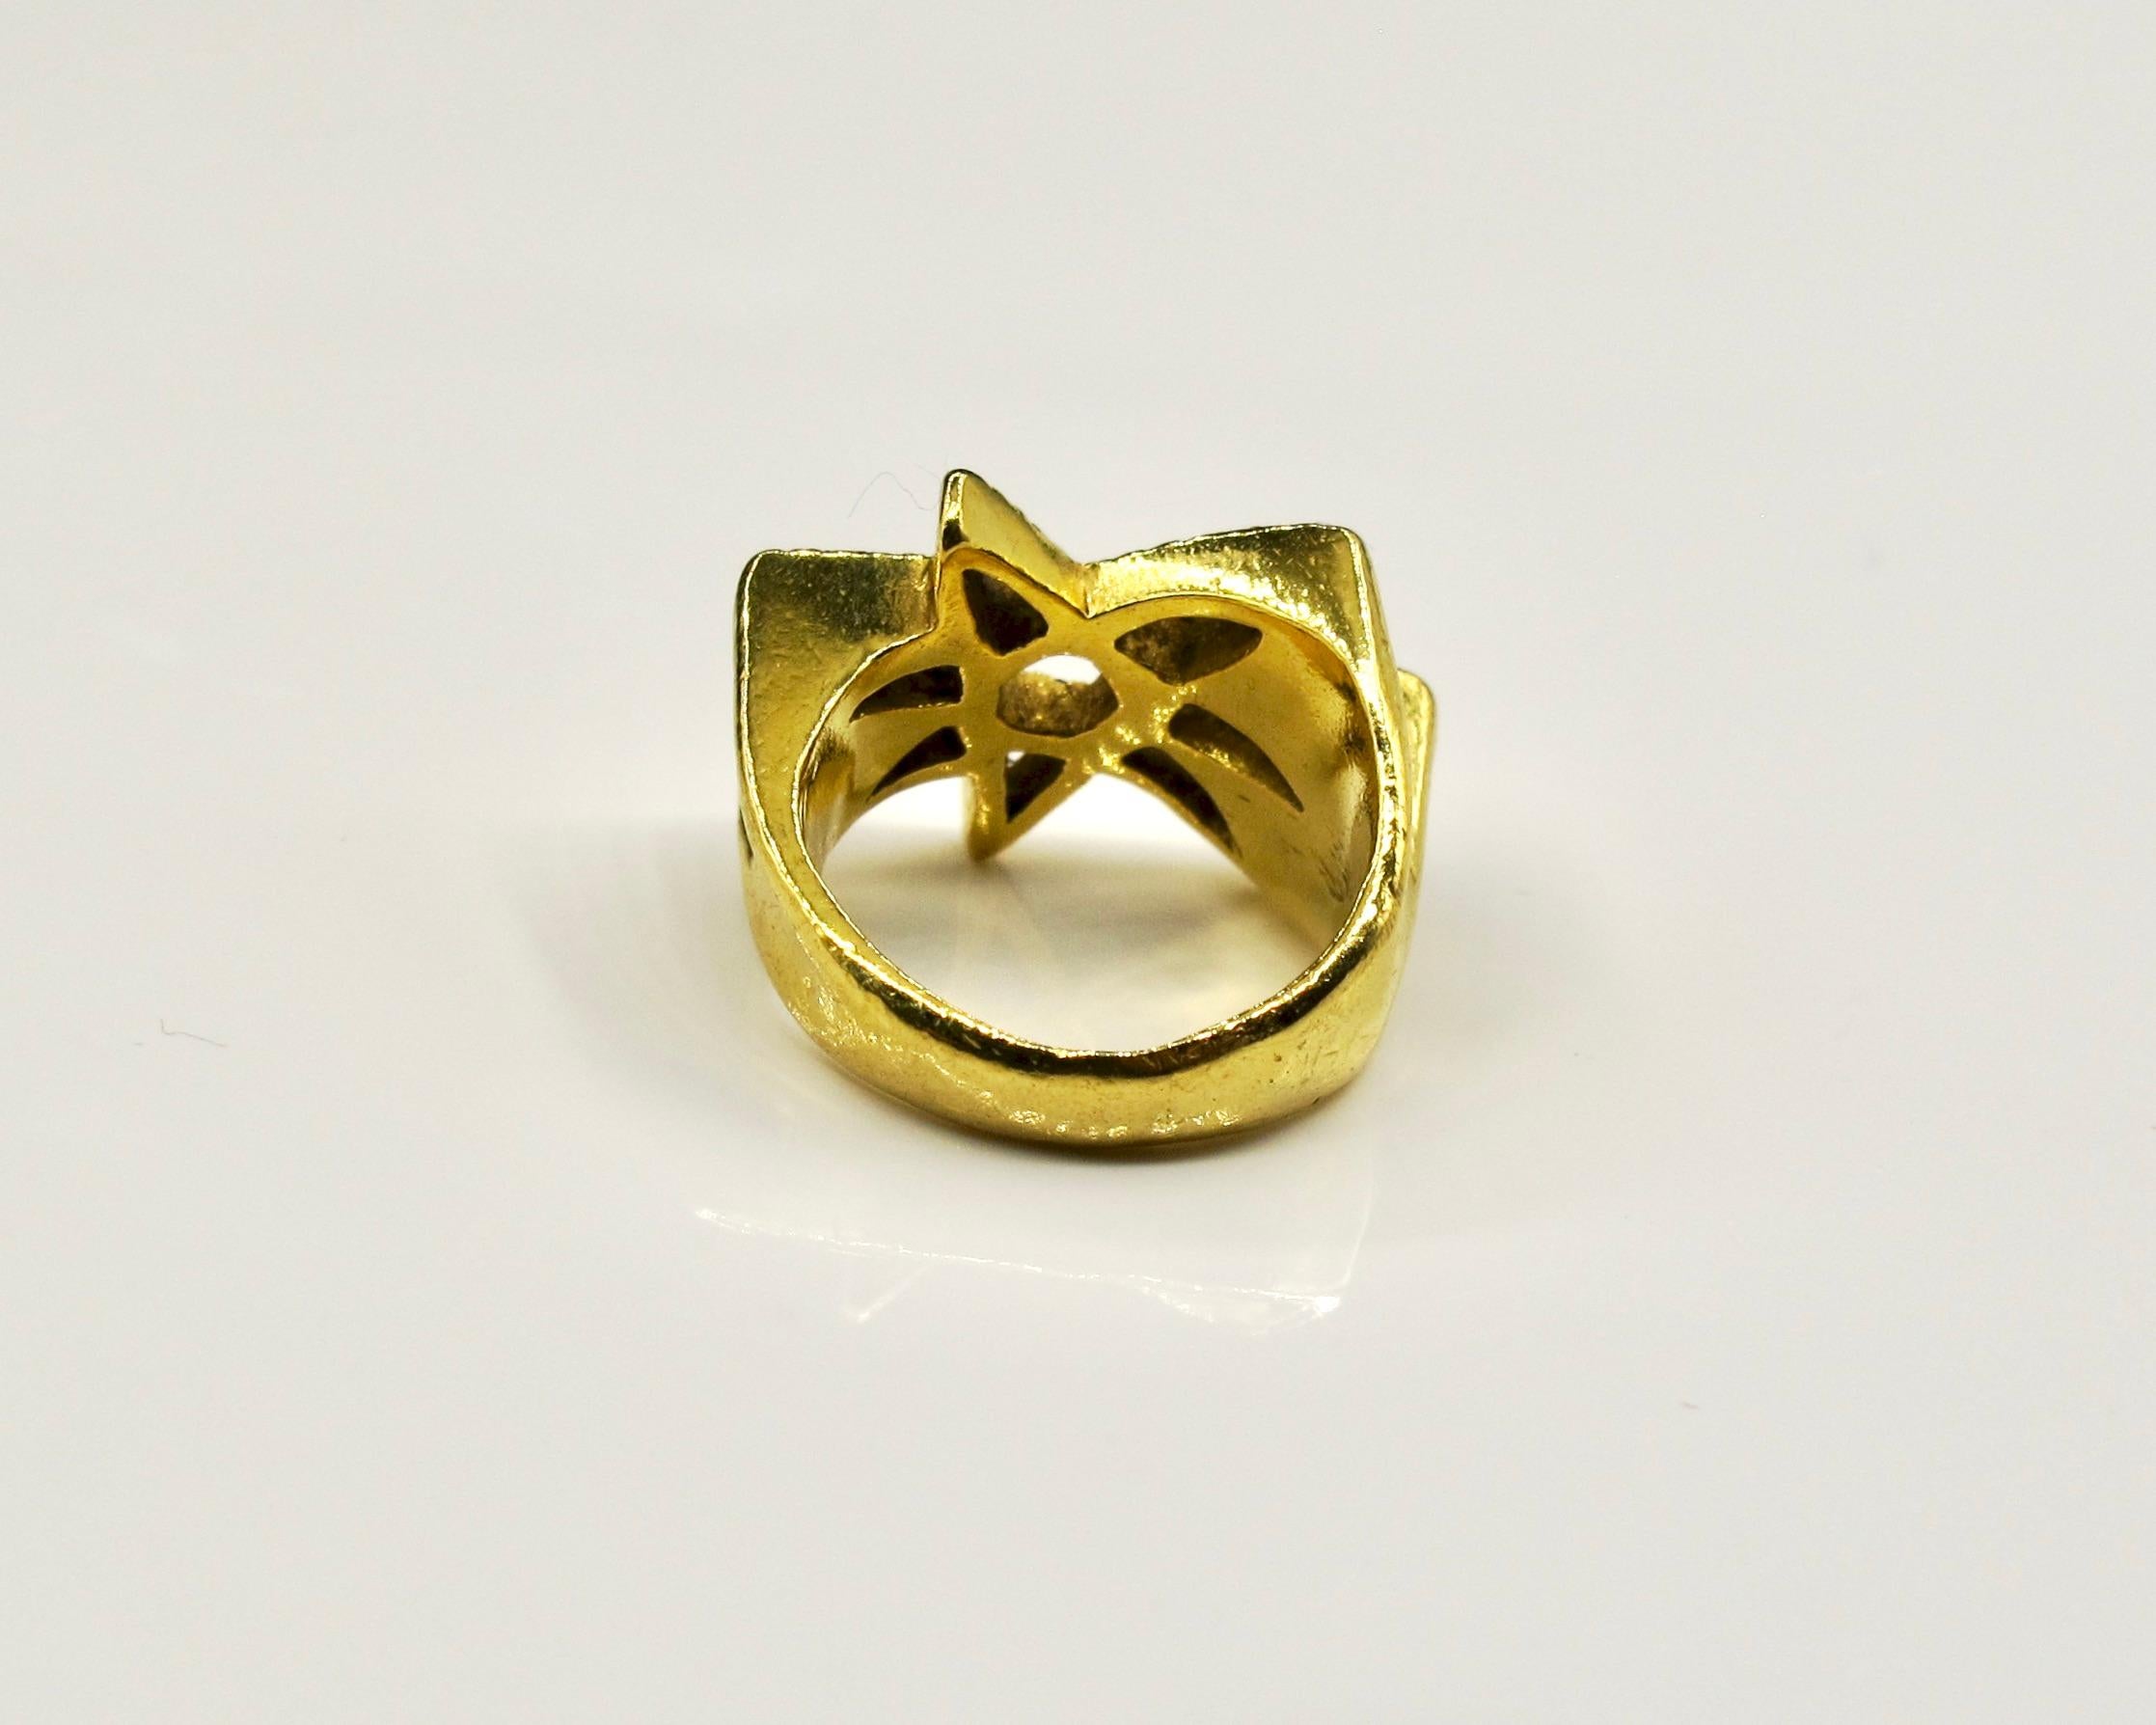 For Sale:  RIMA JEWELS 22k Gold Alchemical Seven Pointed Star Ring 4